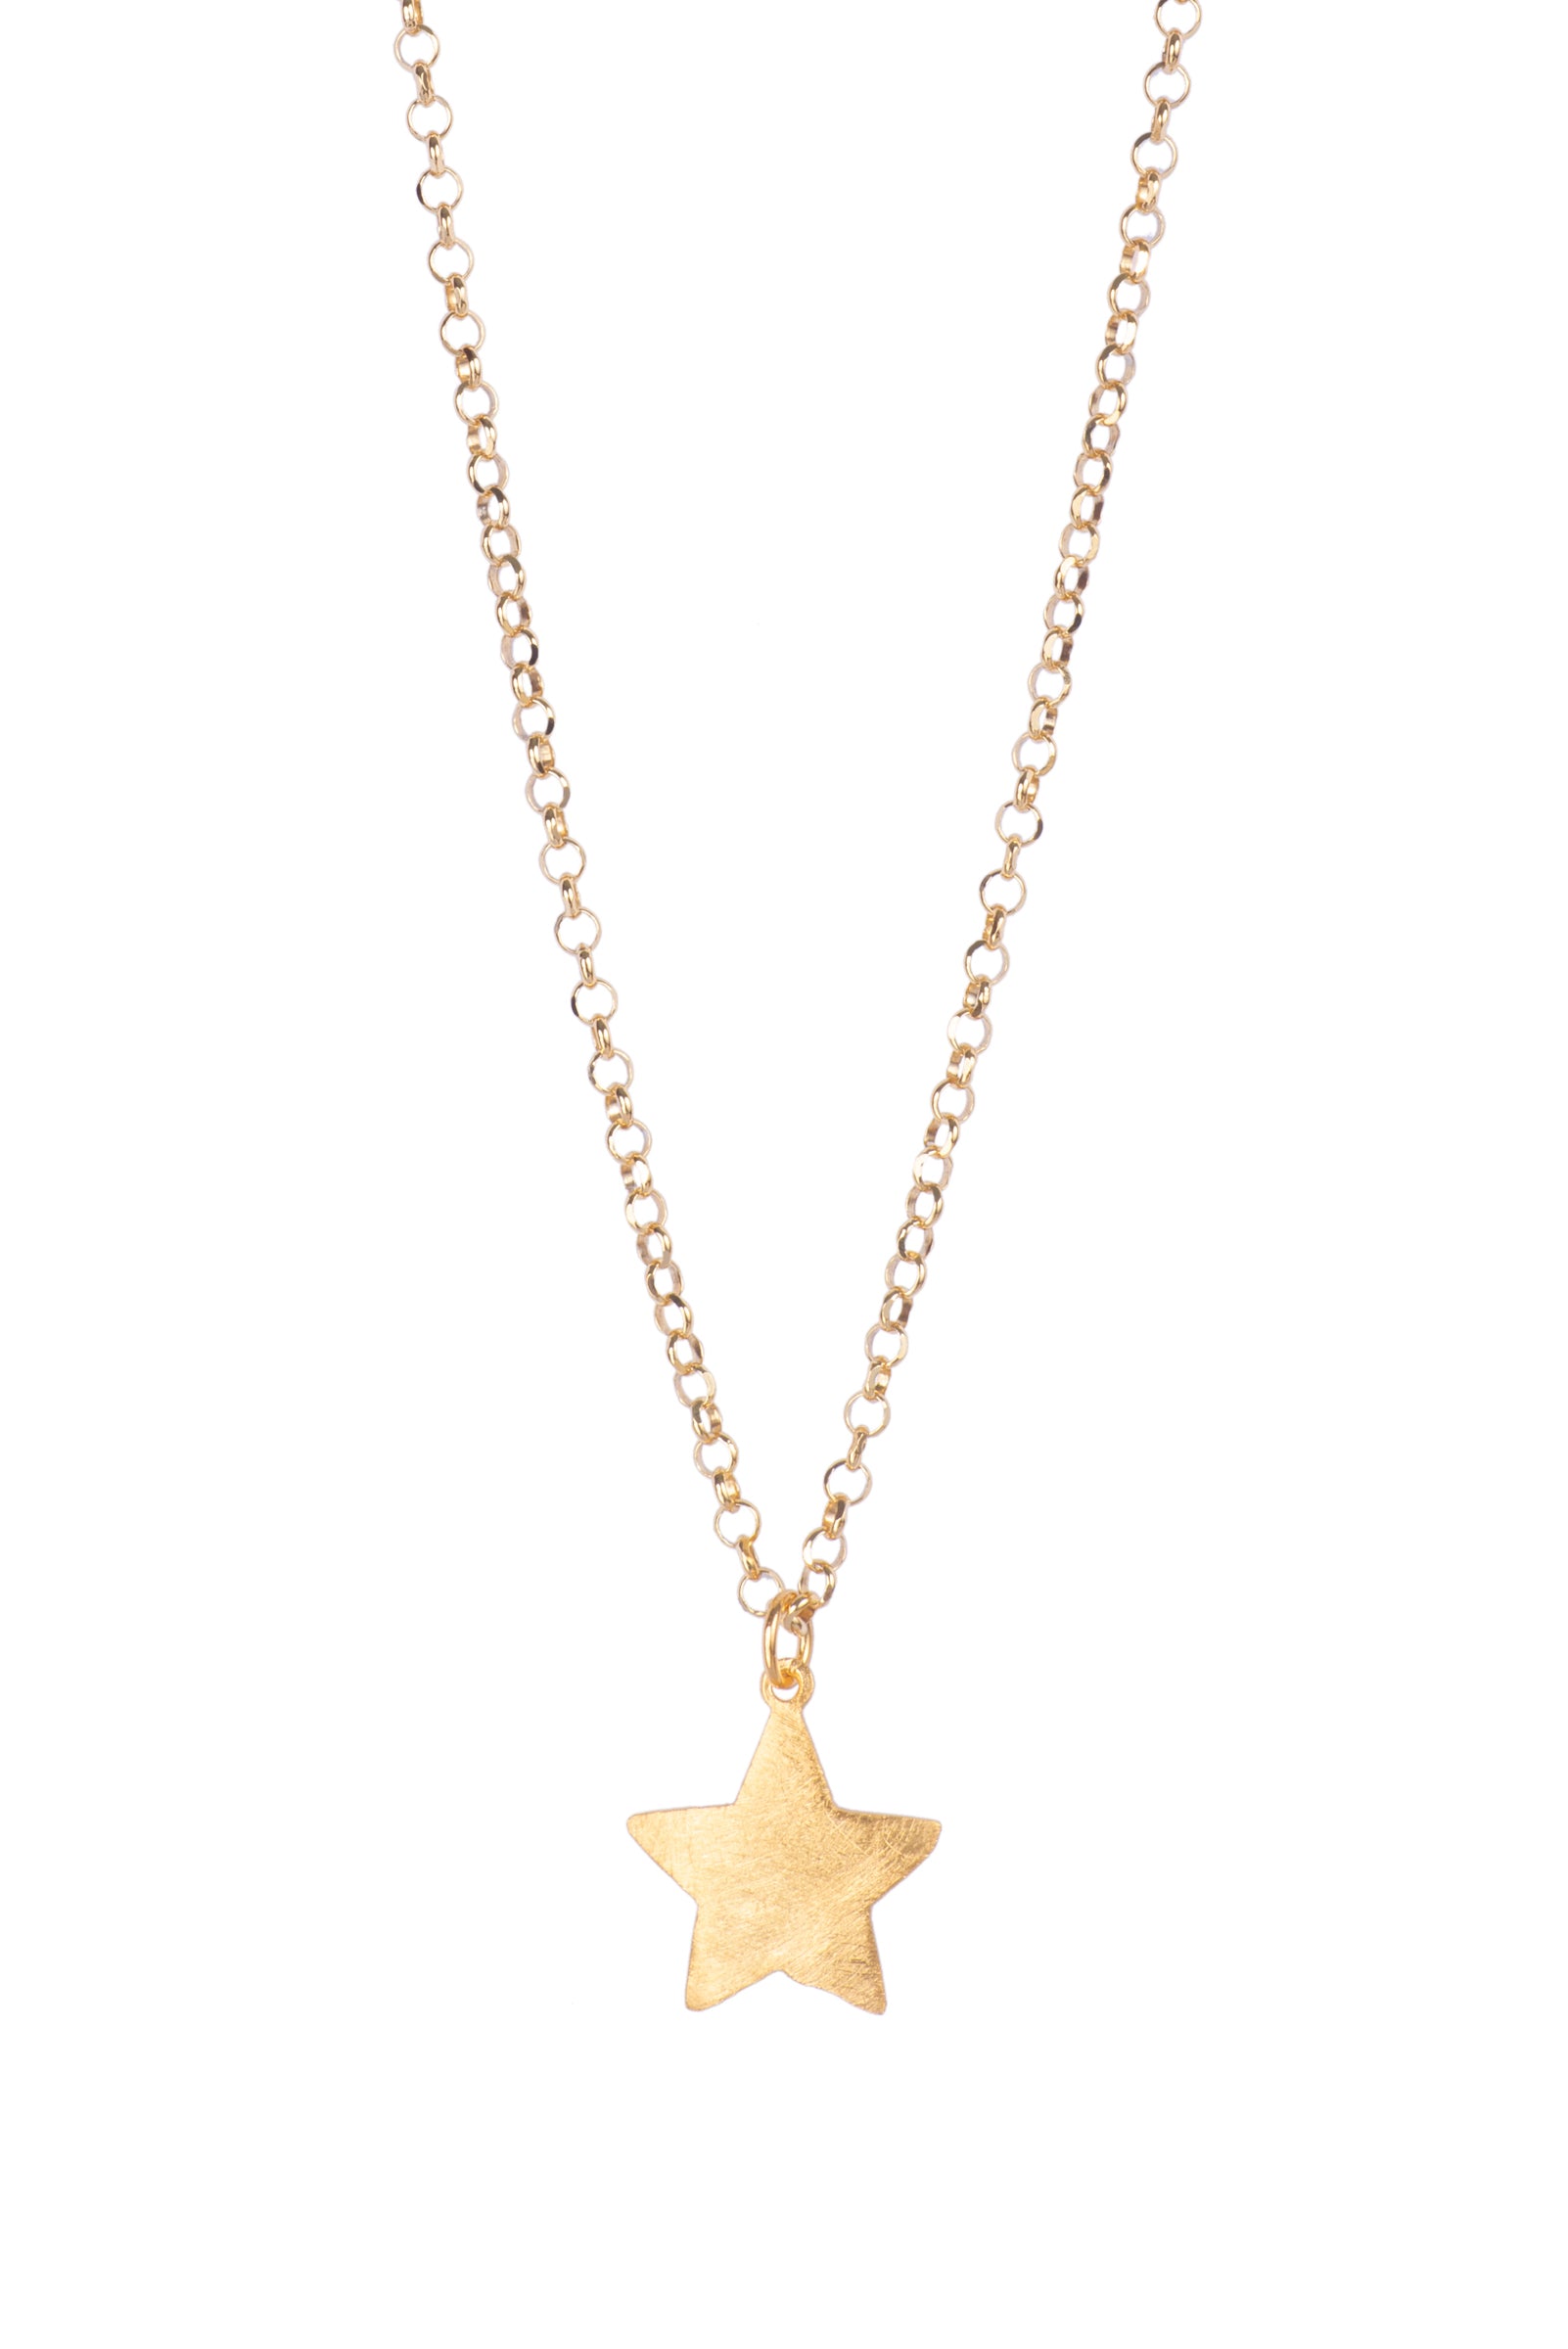 STAR || NECKLACE